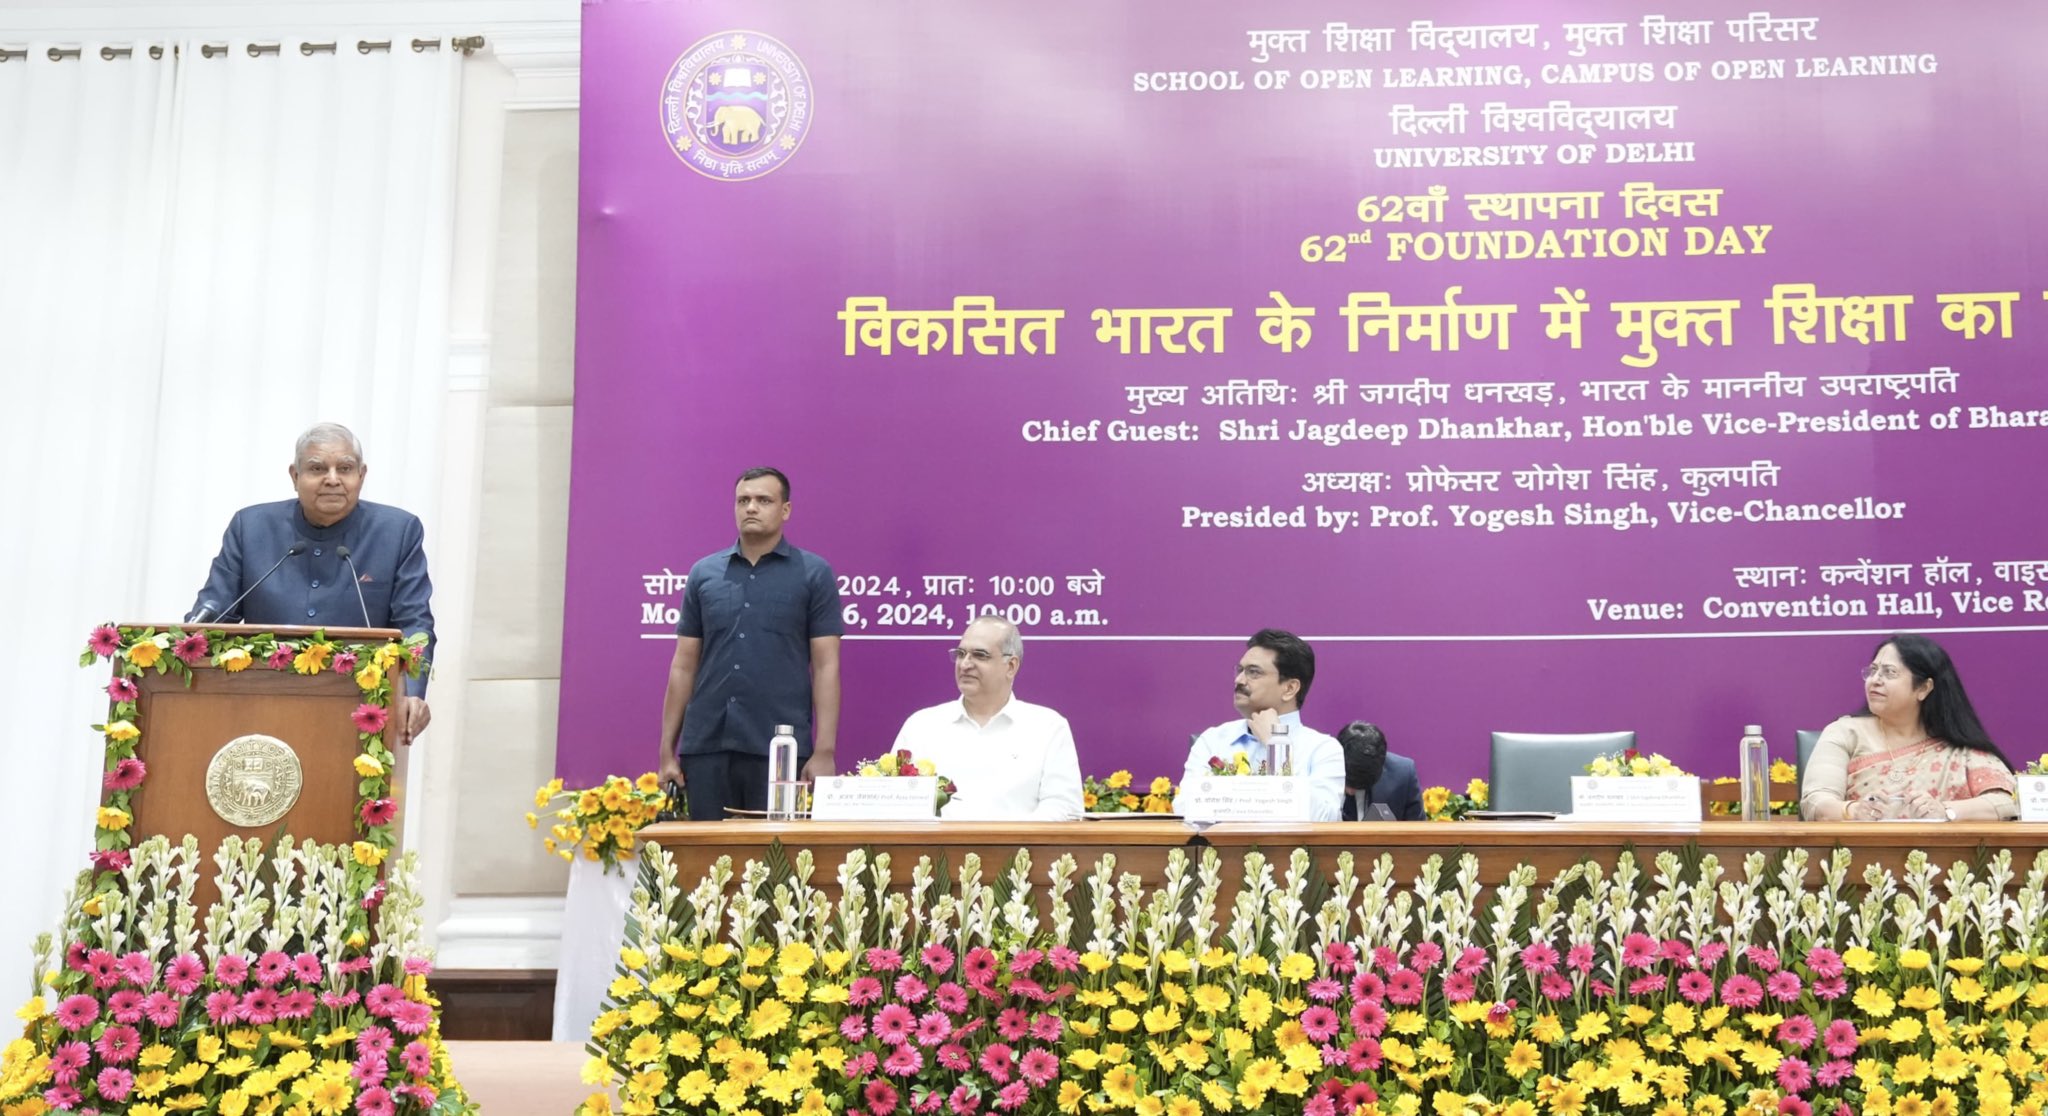 The Vice-President, Shri Jagdeep Dhankhar addressing the students and faculty members of School of Open Learning at University of Delhi in Delhi on May 6, 2024.